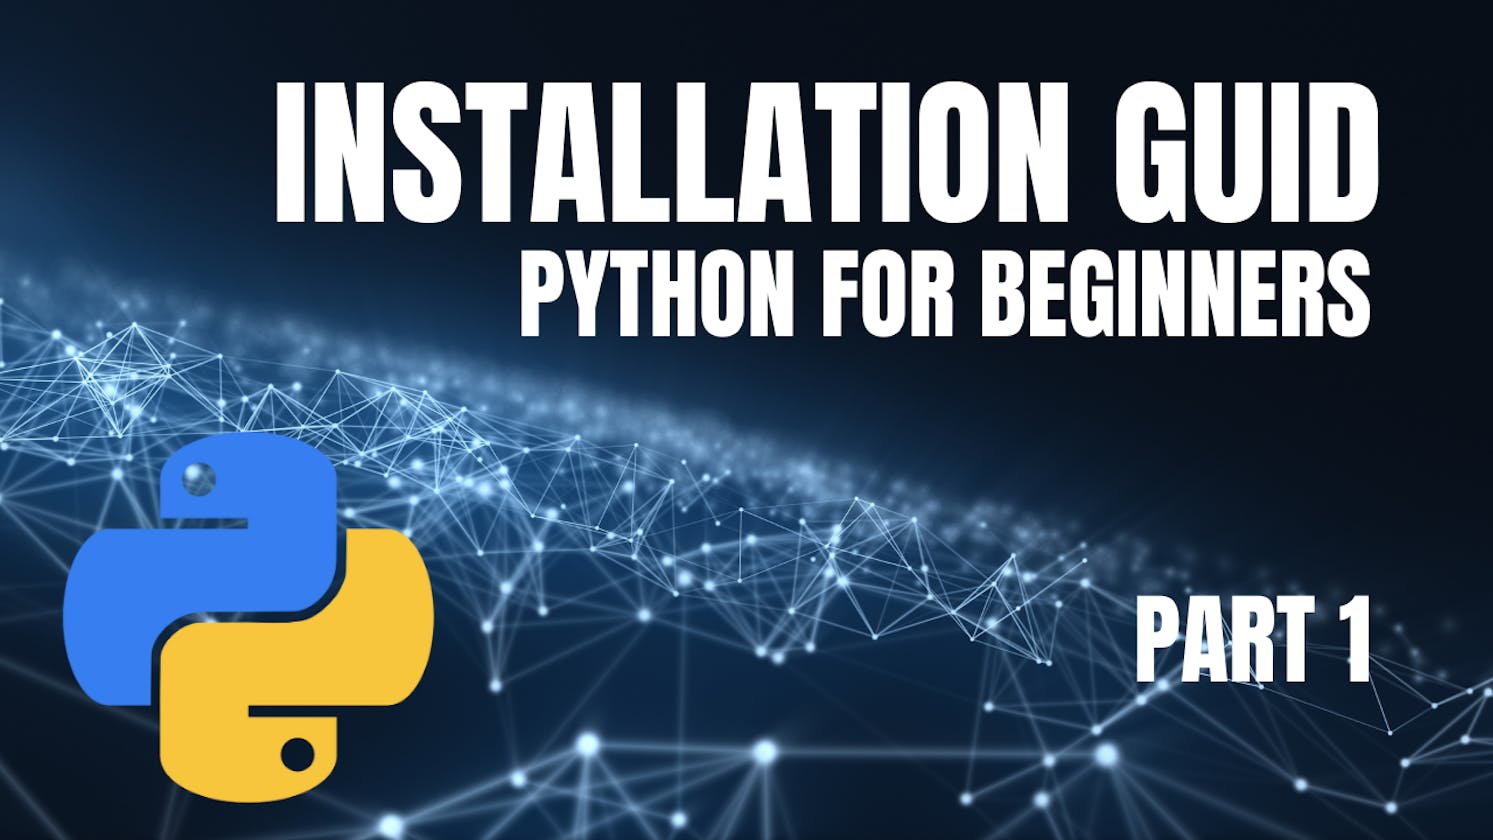 Python for Beginners: Part 1 - Installation Guide